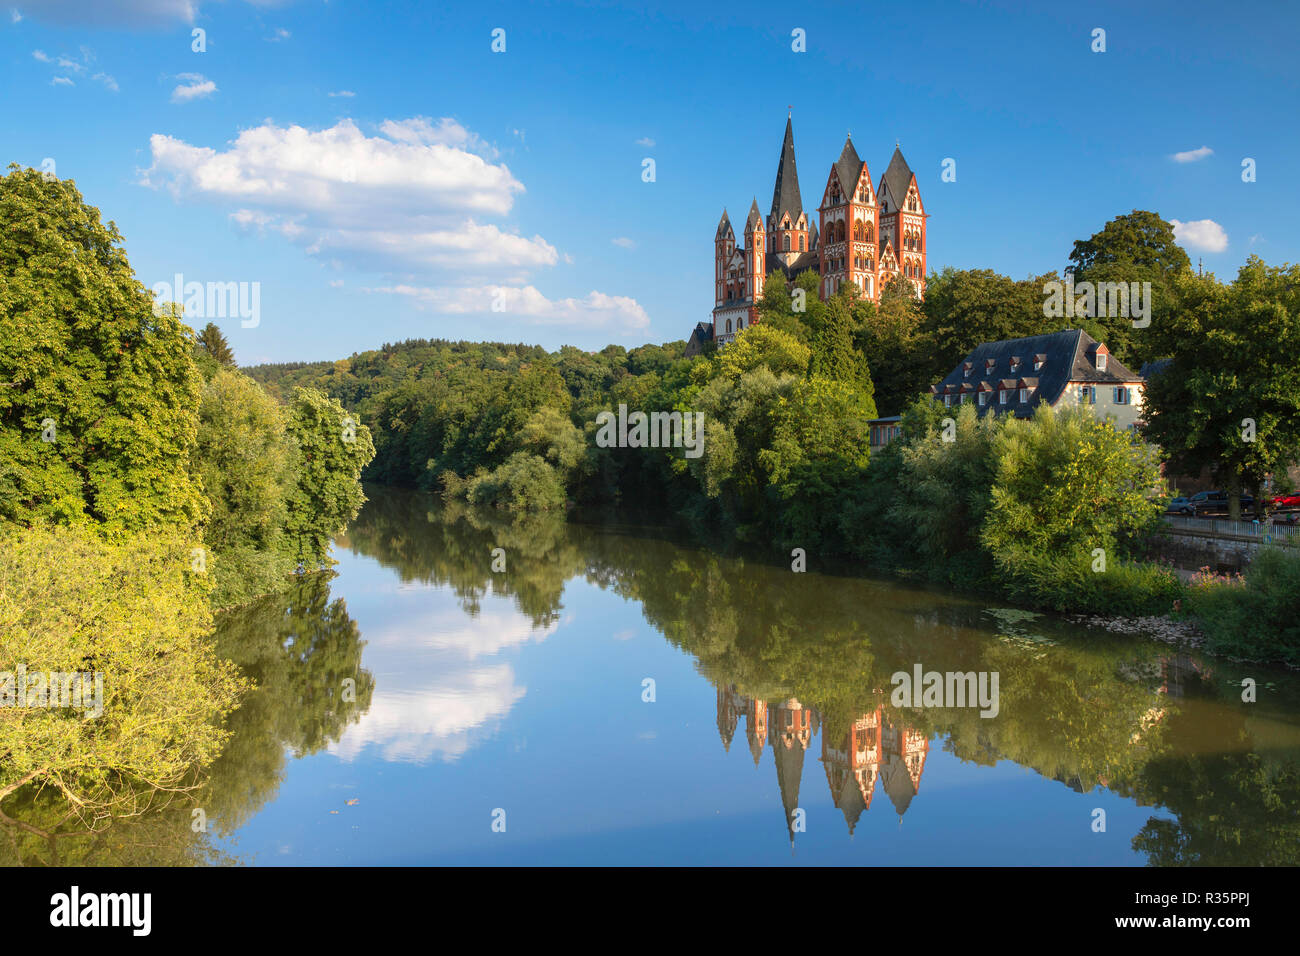 Cathedral (Dom) and River Lahn, Limburg, Hesse, Germany Stock Photo